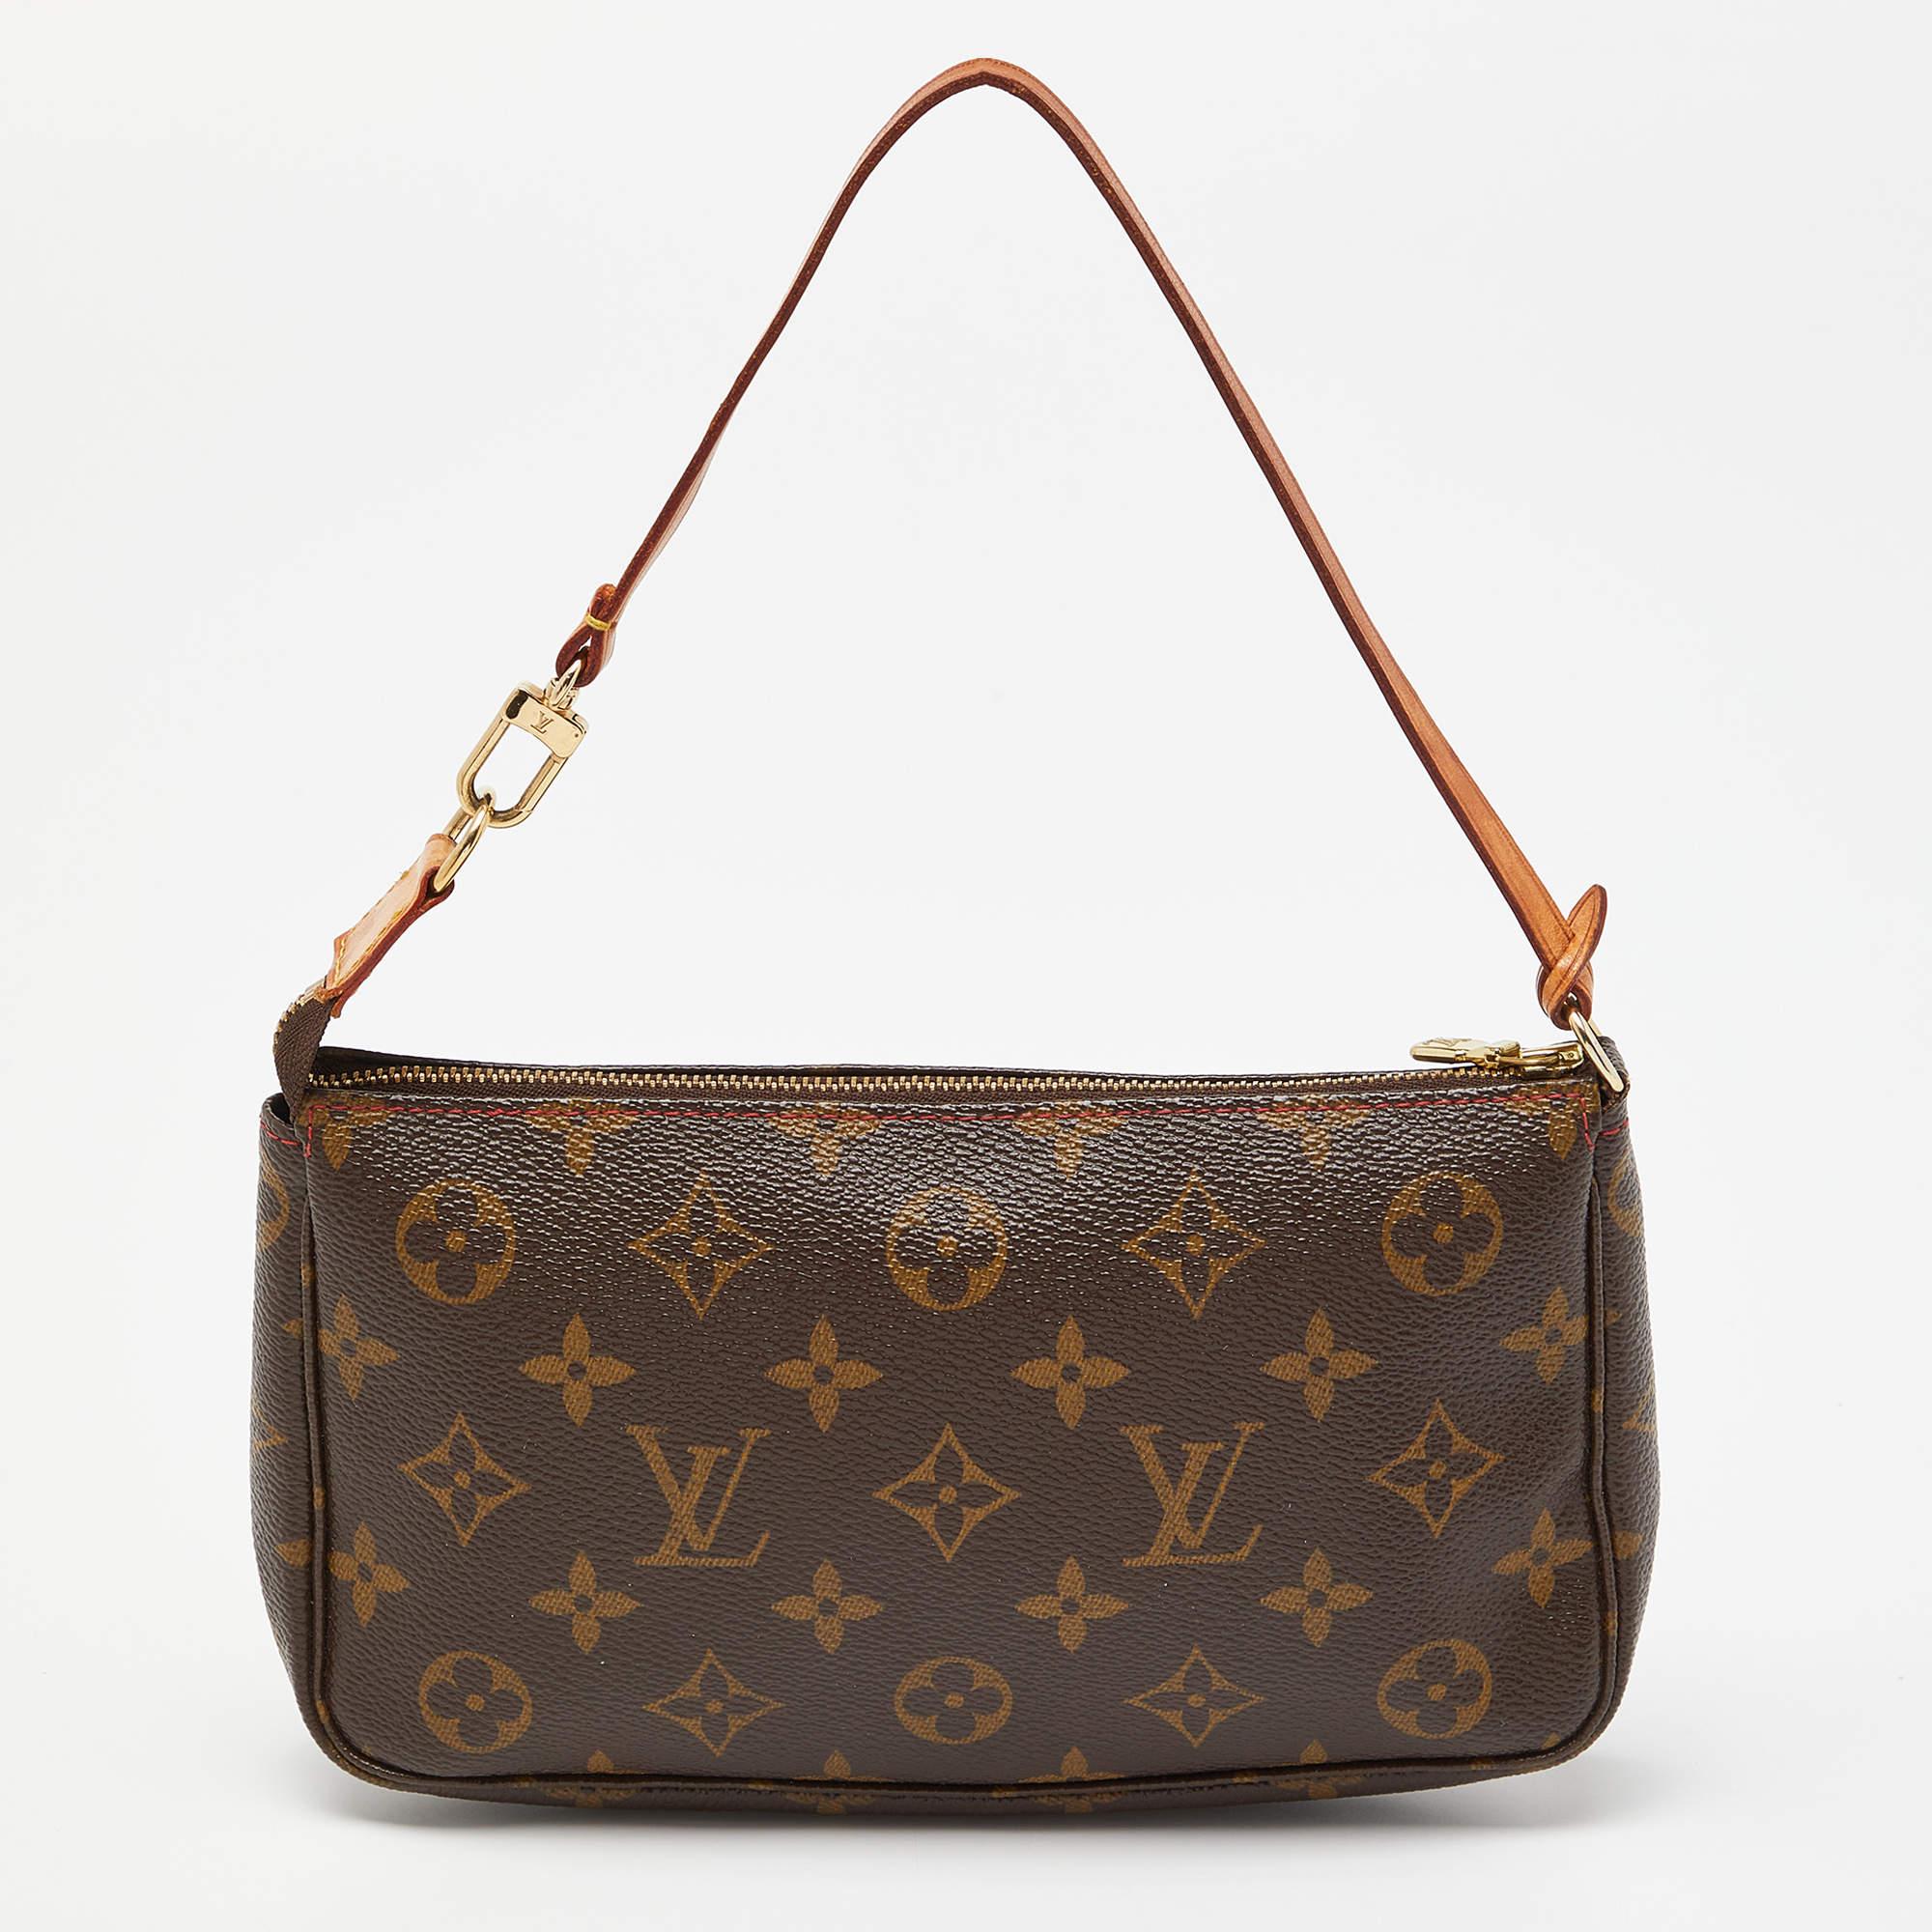 A classic handbag comes with the promise of enduring appeal, boosting your style time and again. This Louis Vuitton Cerises Print Accessories Pochette bag is one such creation. It’s a fine purchase.

